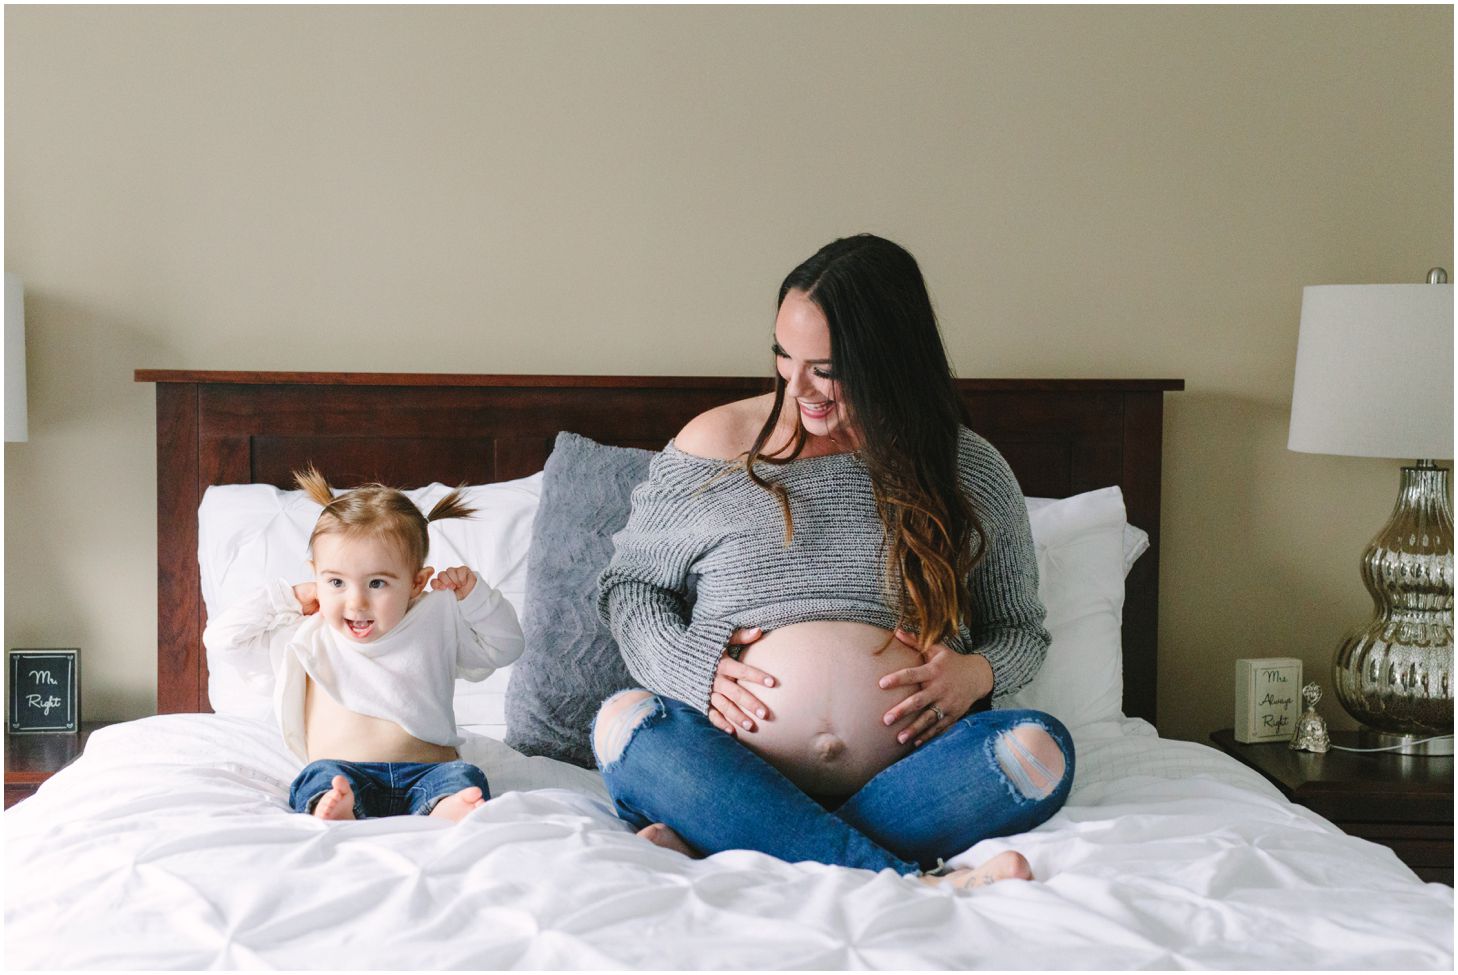 mom and little girl pose on a white bed together showing their bellies